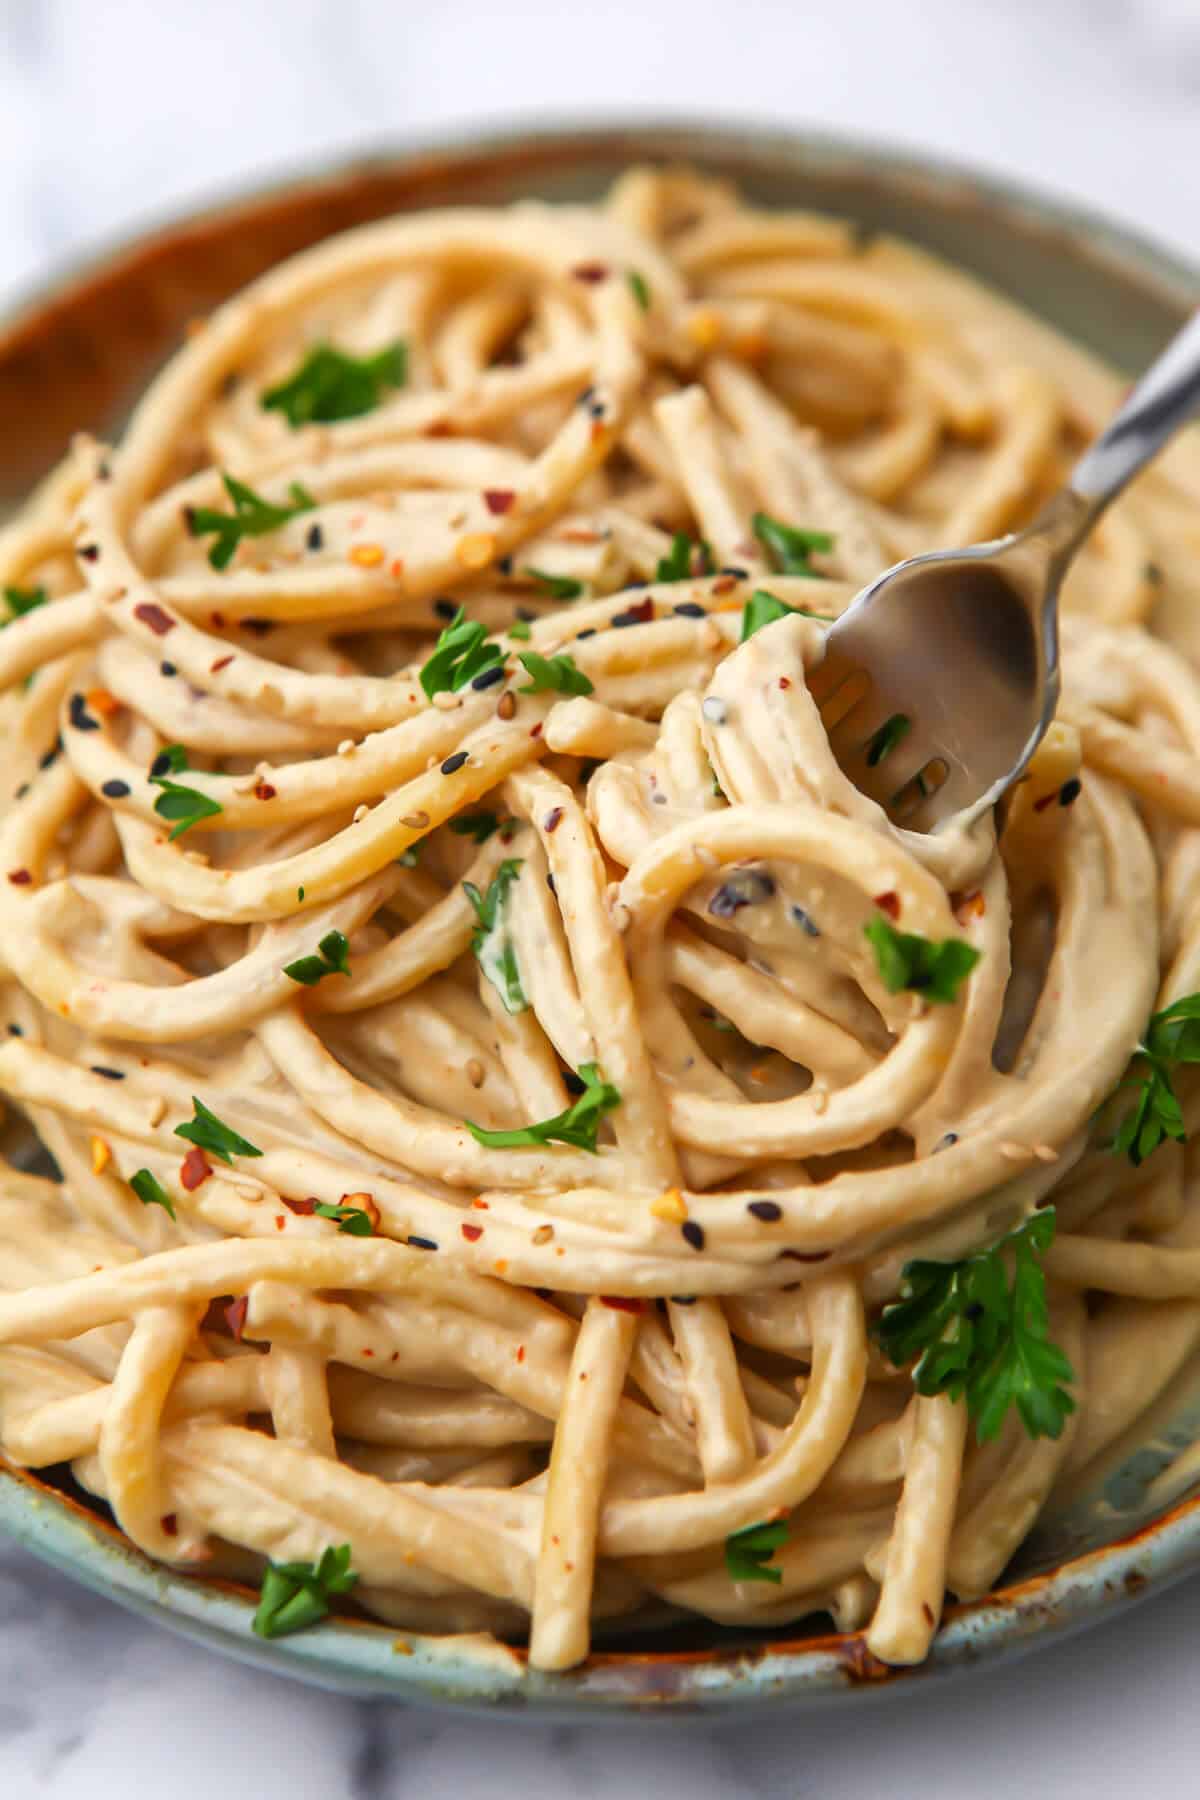 A top view of a plate full of pasta with tahini sauce on it being twirled with a fork.